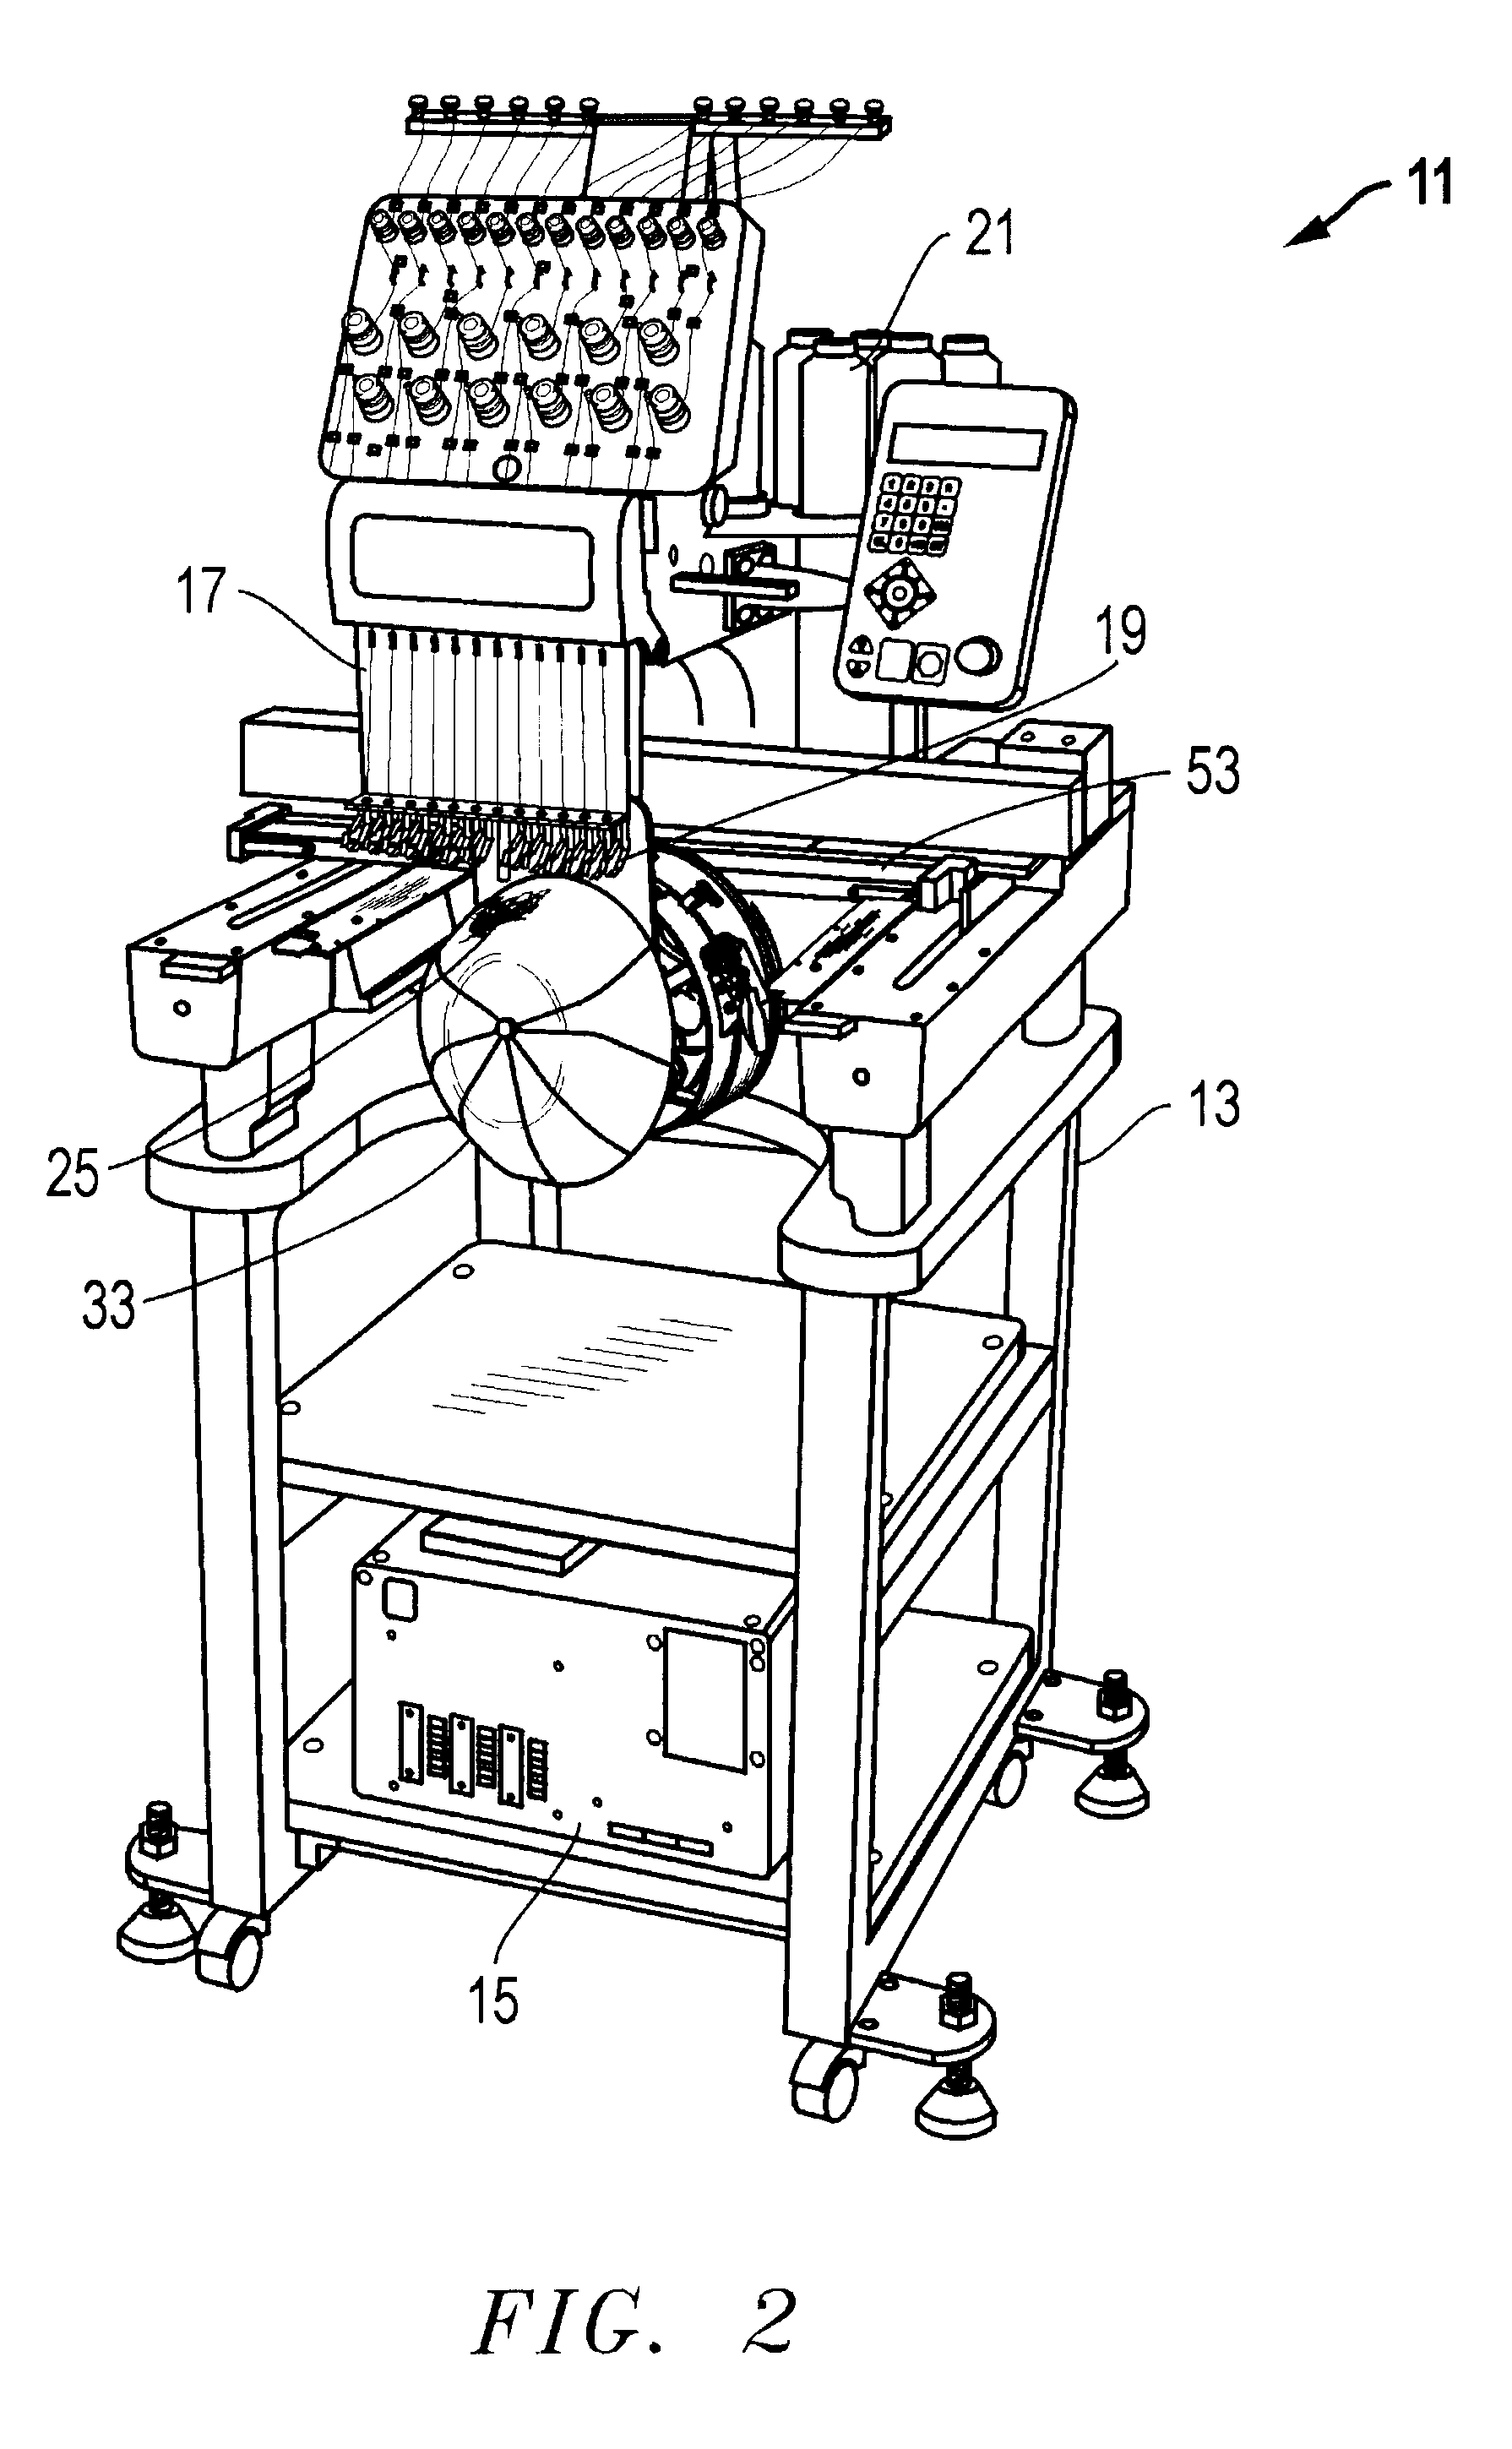 Apparatus, system, and method for adapting a cap frame sash to be quickly mounted to and dismounted from a tubular frame sash on an automatic embroidery machine